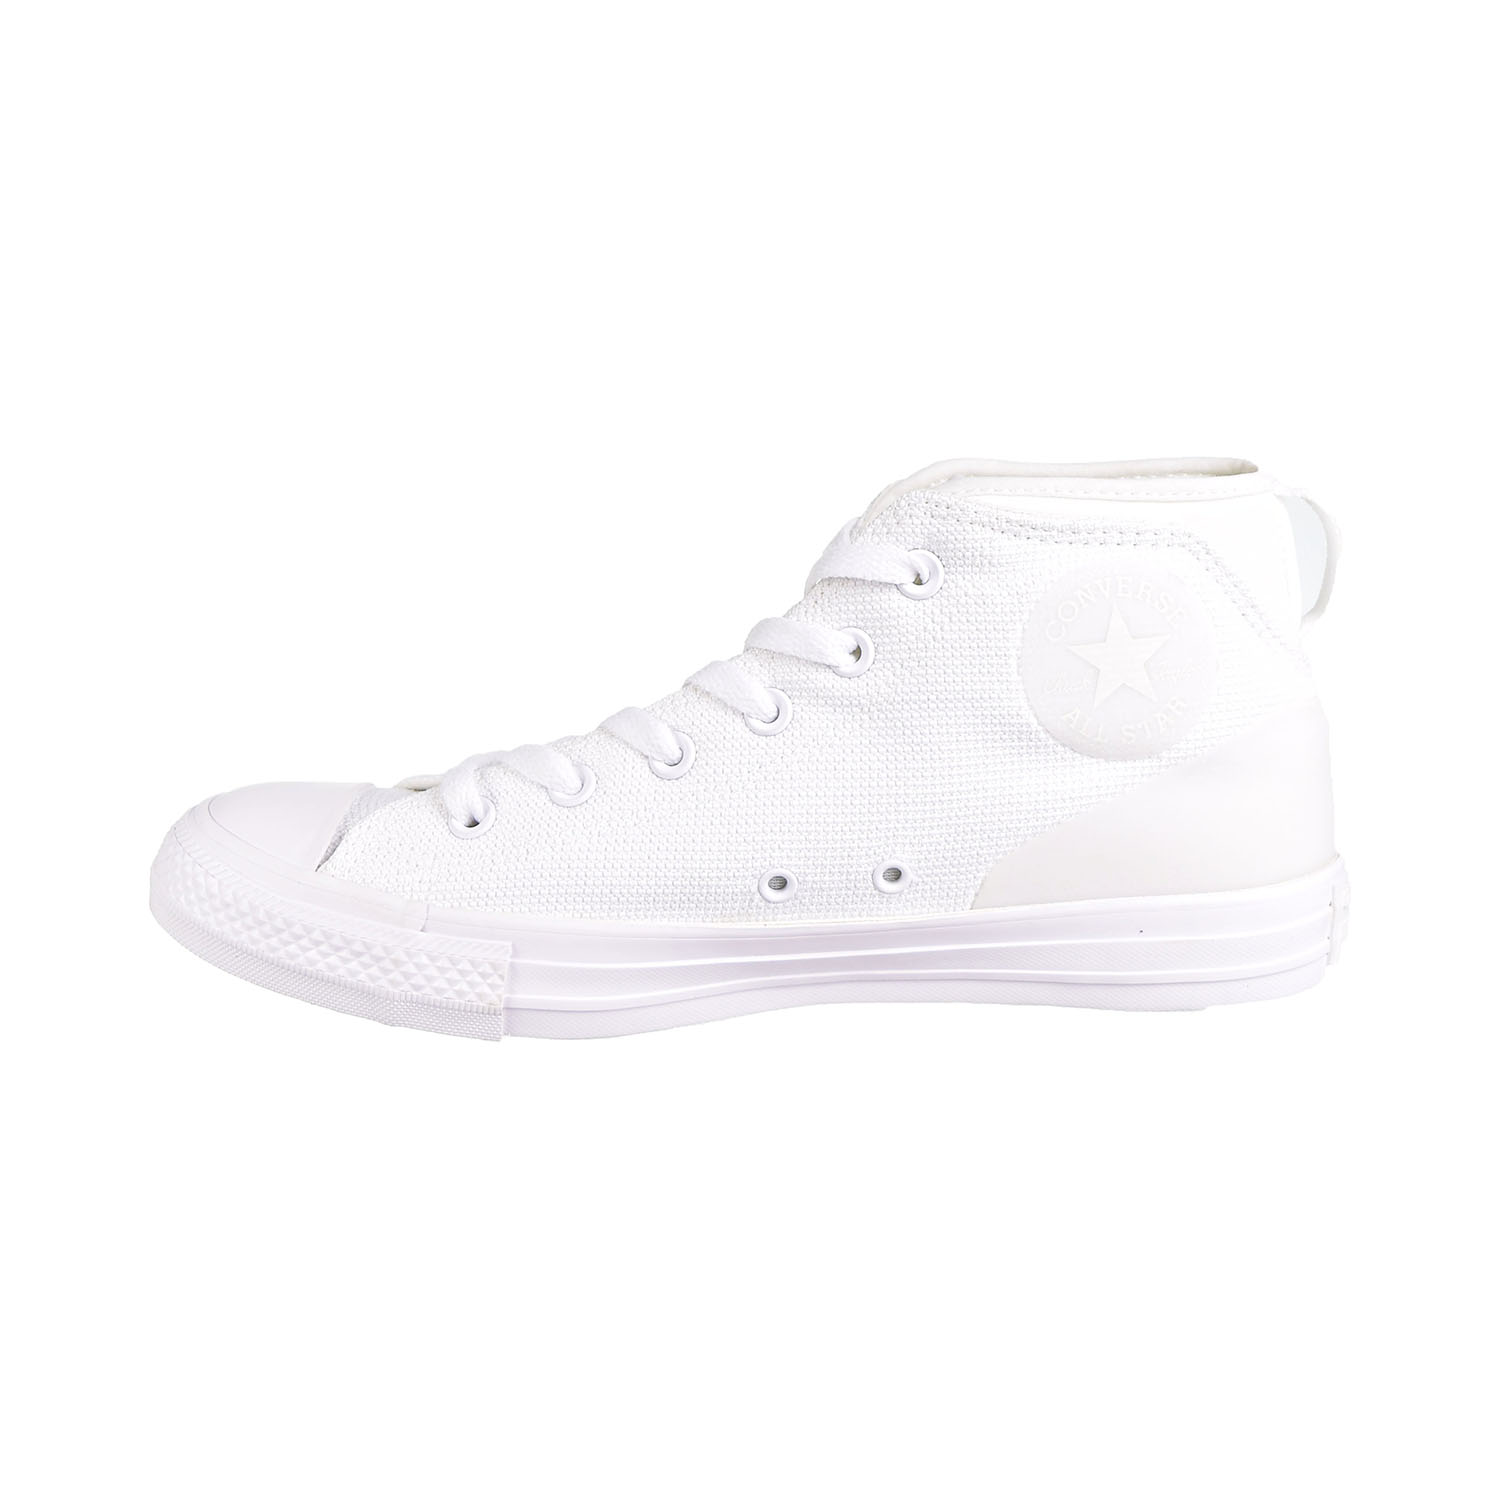 Converse Chuck Taylor All Star Syde Street Men's Shoes White-White 155490c - image 4 of 6